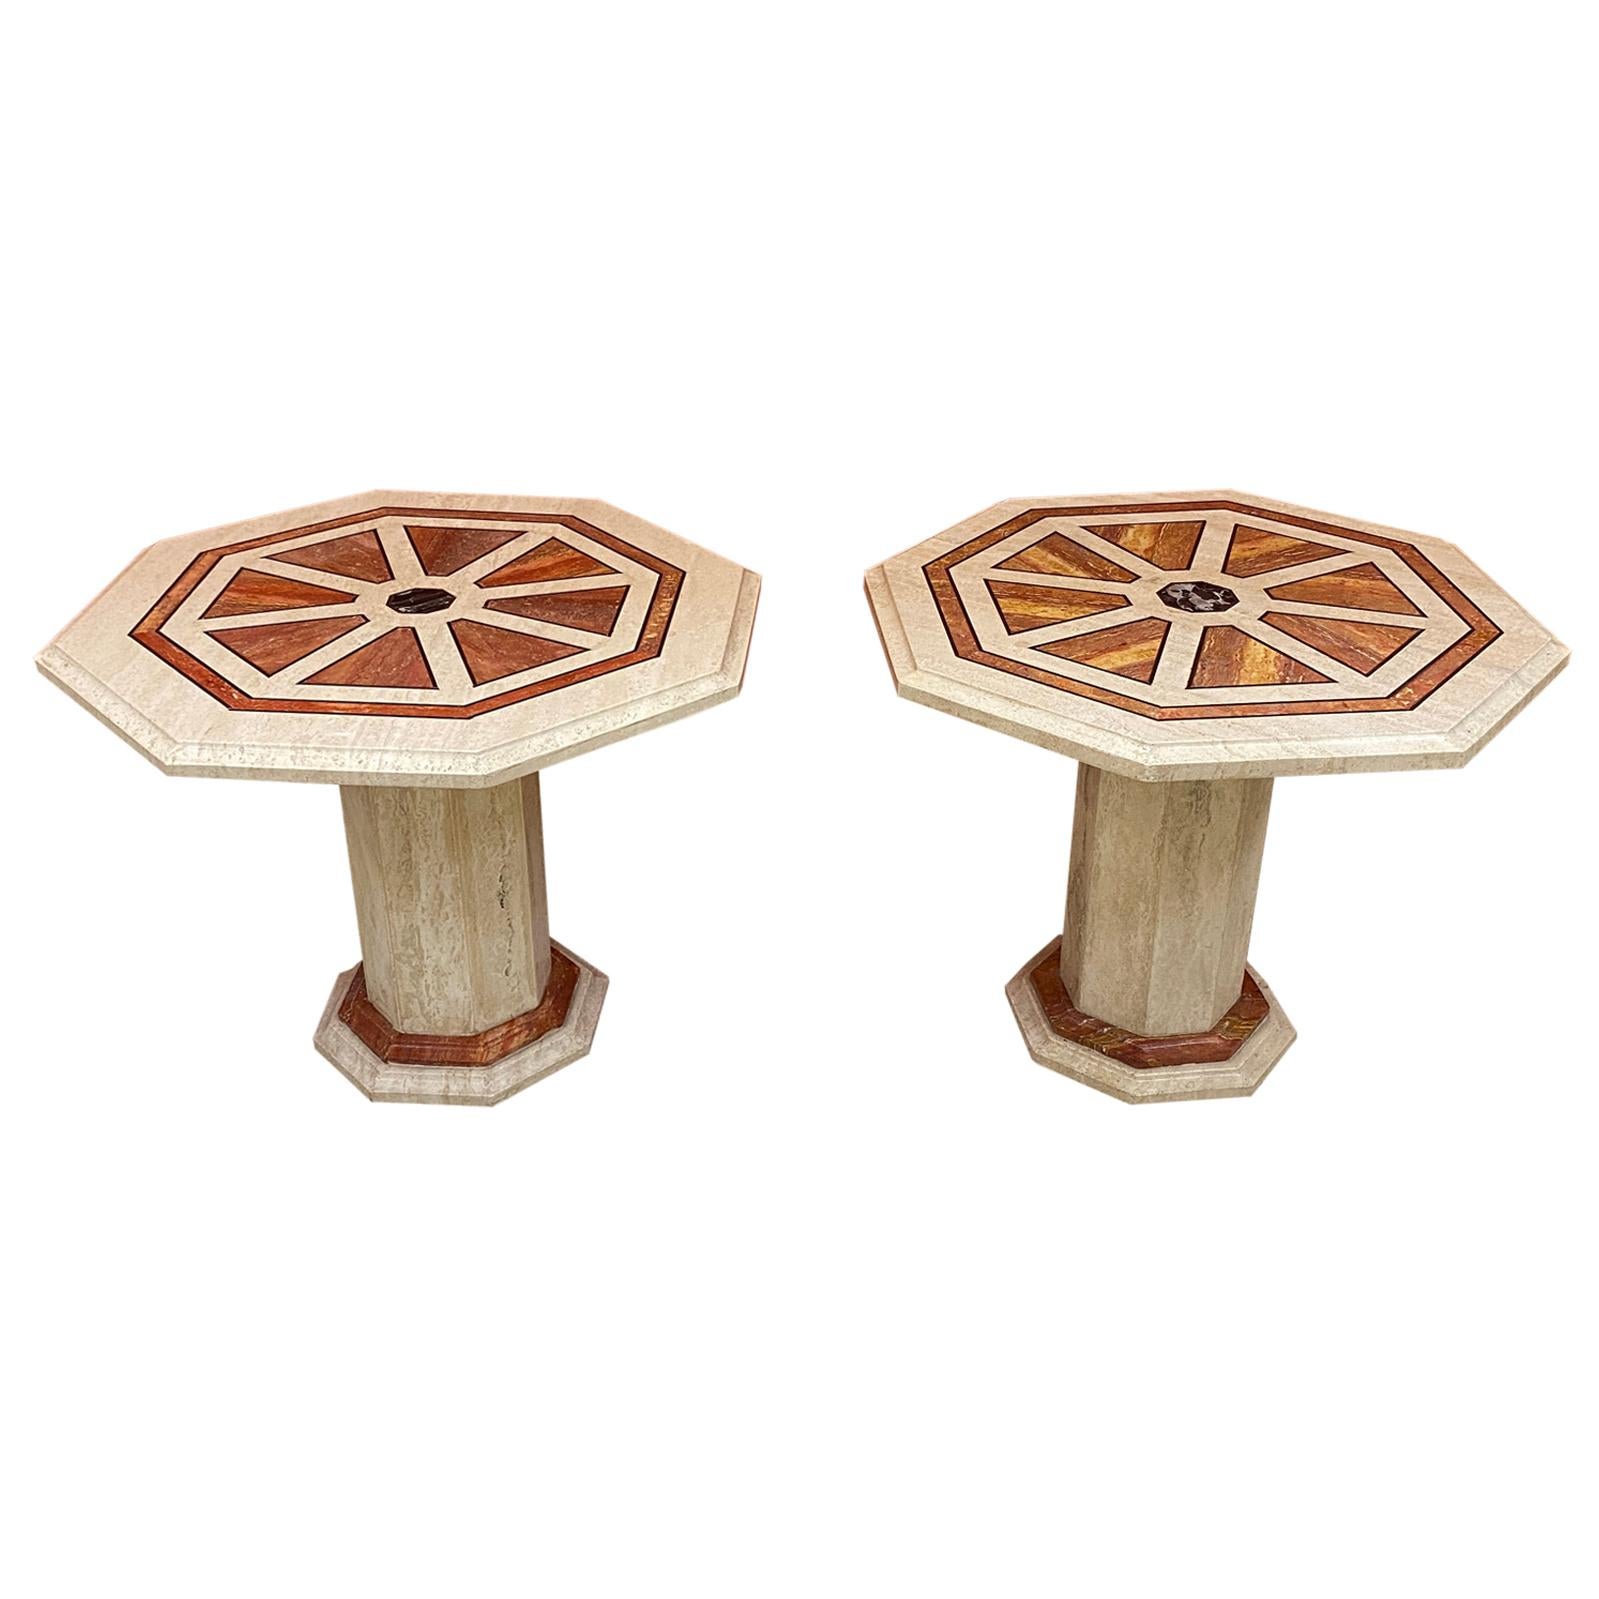 2 Travertine Side Tables, with Brass and Marble Inlay, circa 1970